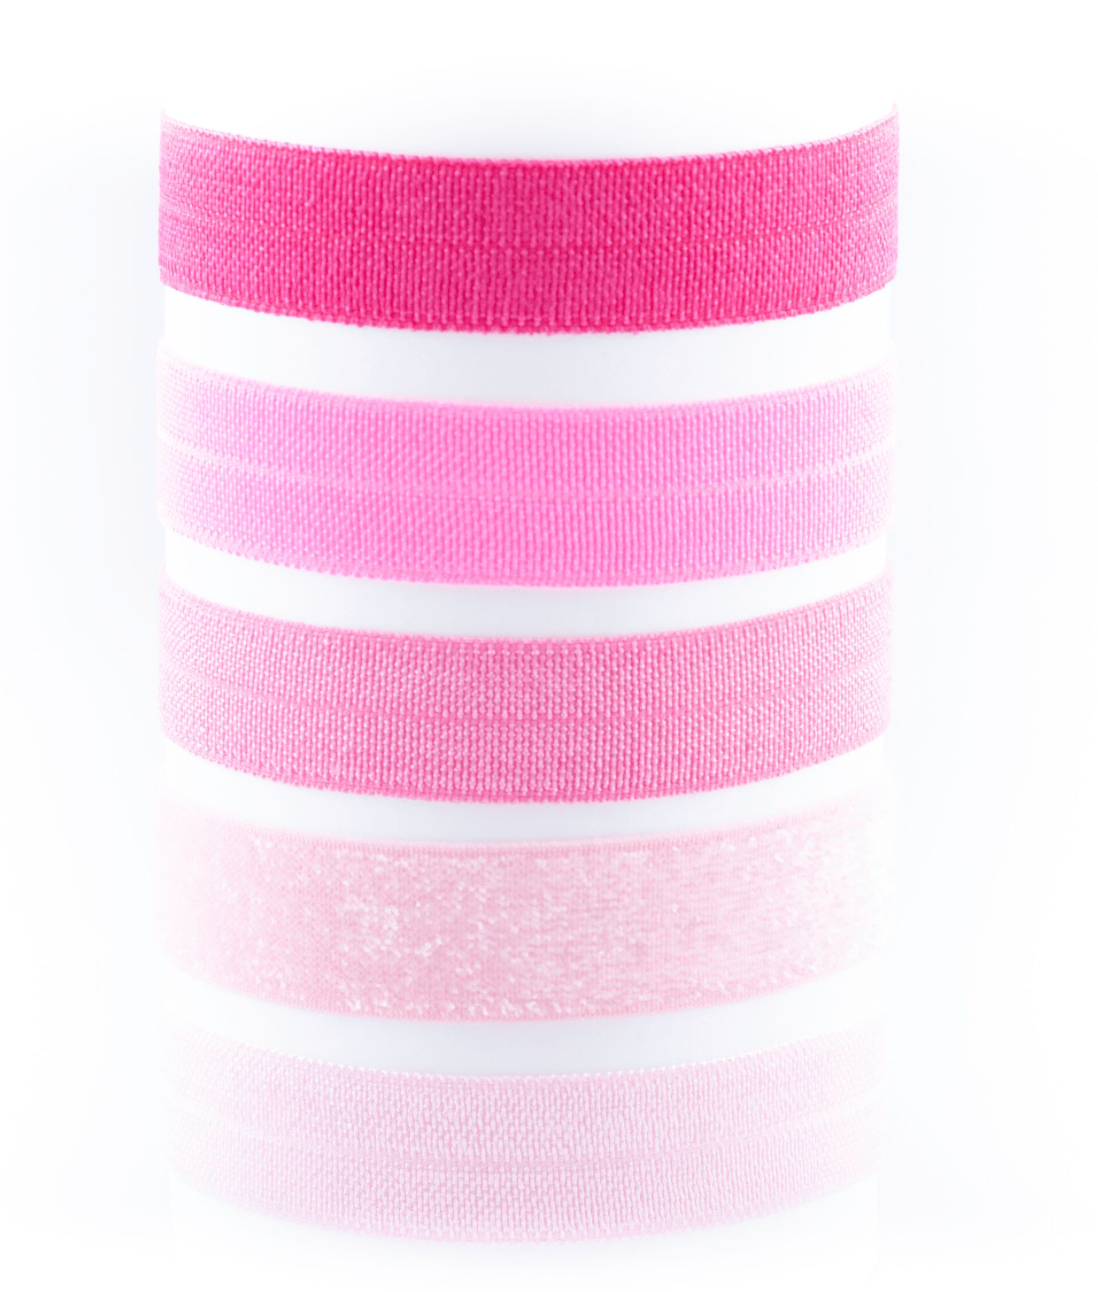 CONSTANCE THINK PINK OMBRE HAIR TIES | c o n s t a n c e g o l d